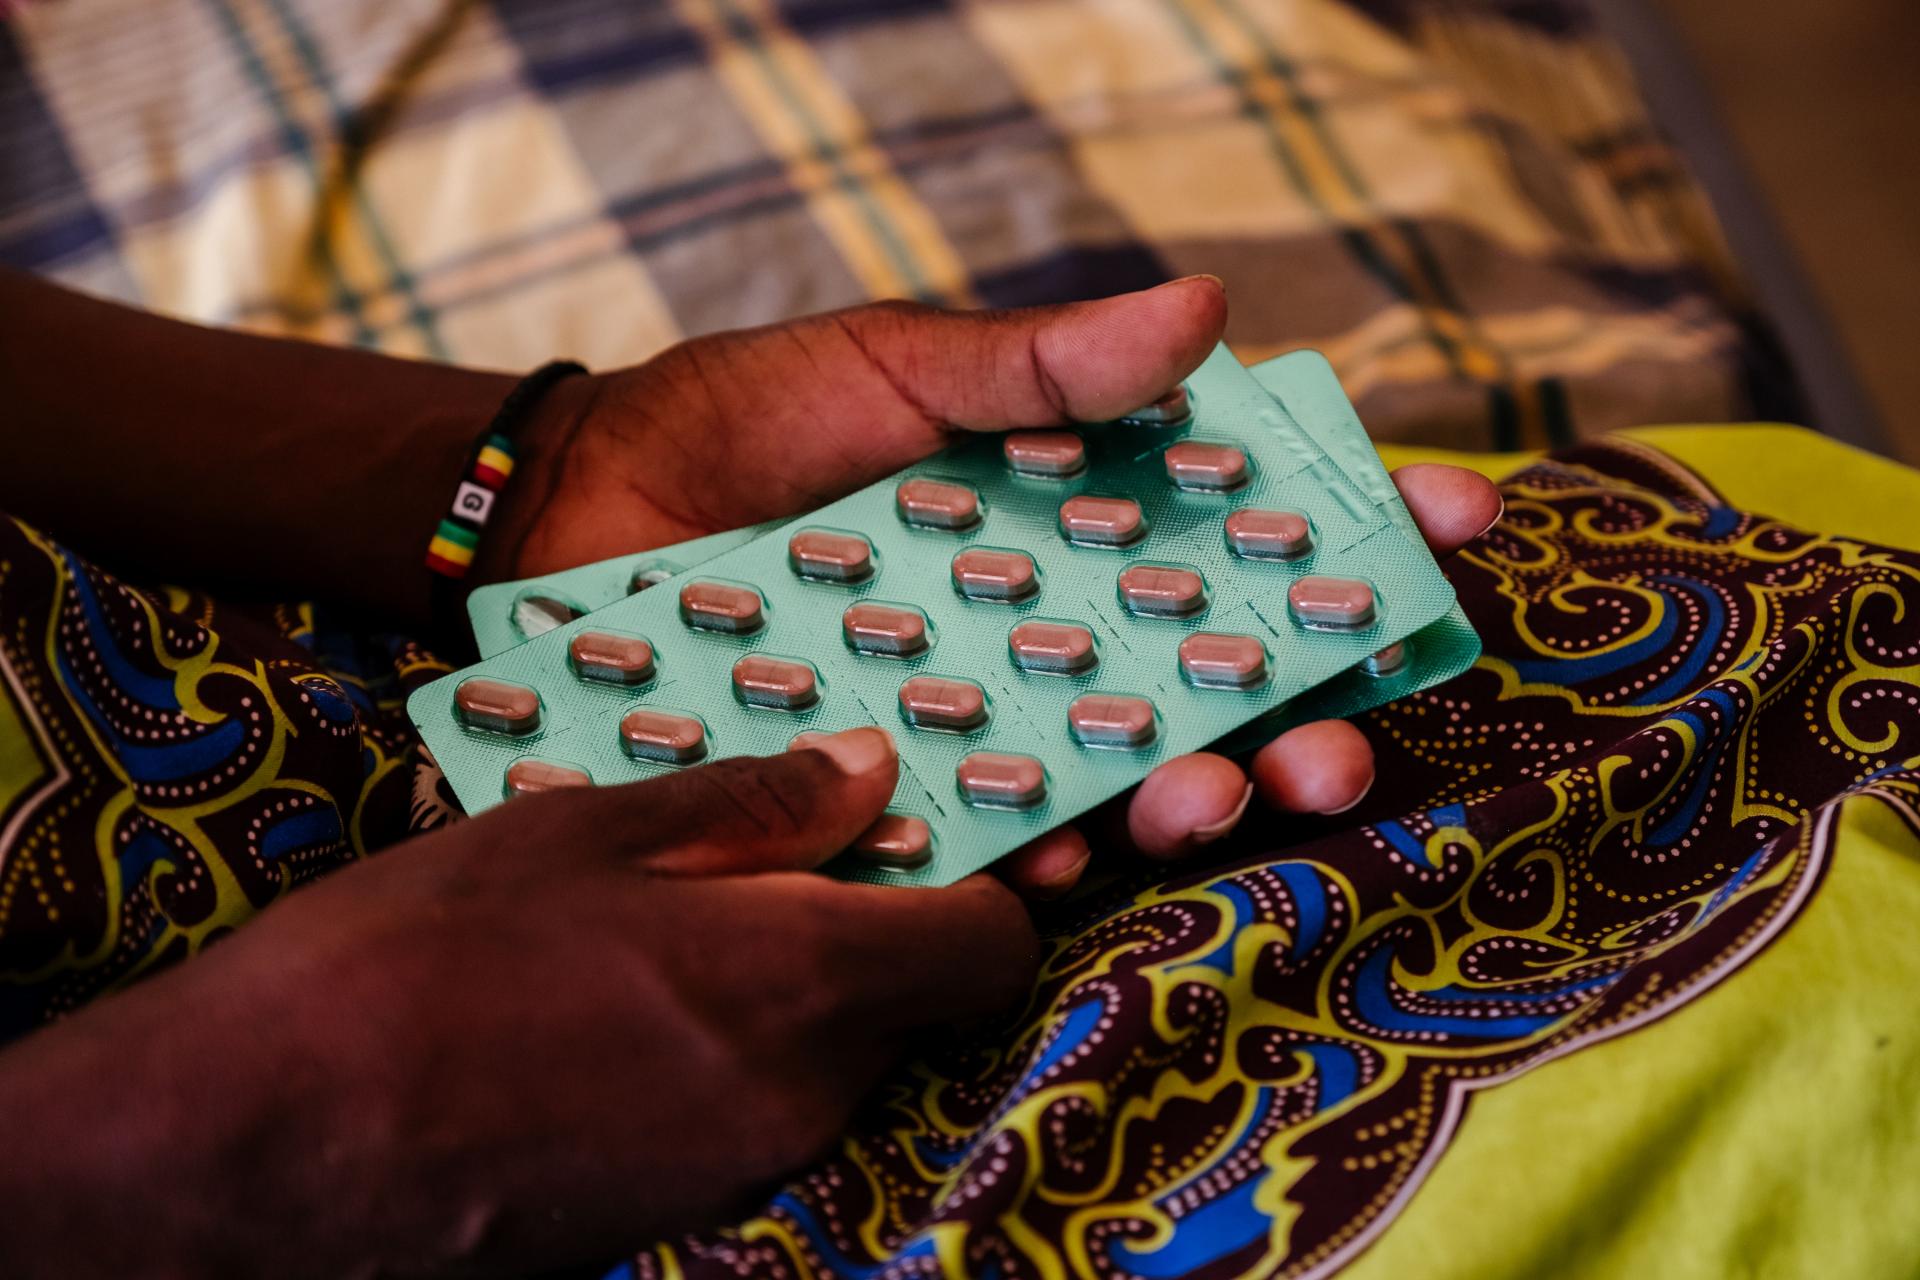 Ether, an advanced HIV patient, with her medication in her hands, in a female ward at Nsanje District Hospital, Malawi. 